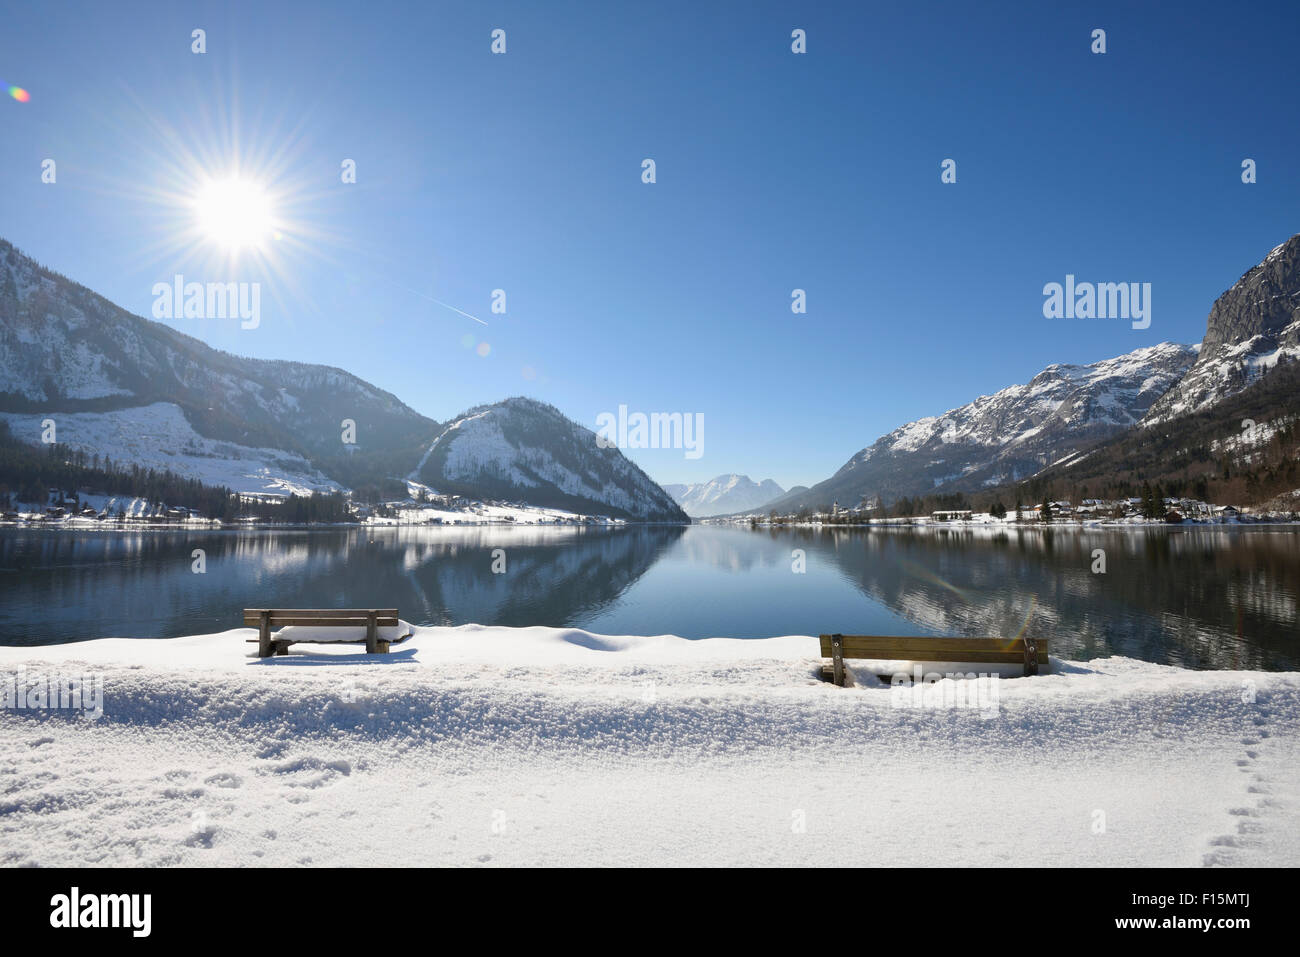 Landscape of Benches in Snow next to Grundlsee Lake in Winter, Liezen District, Styria, Germany Stock Photo